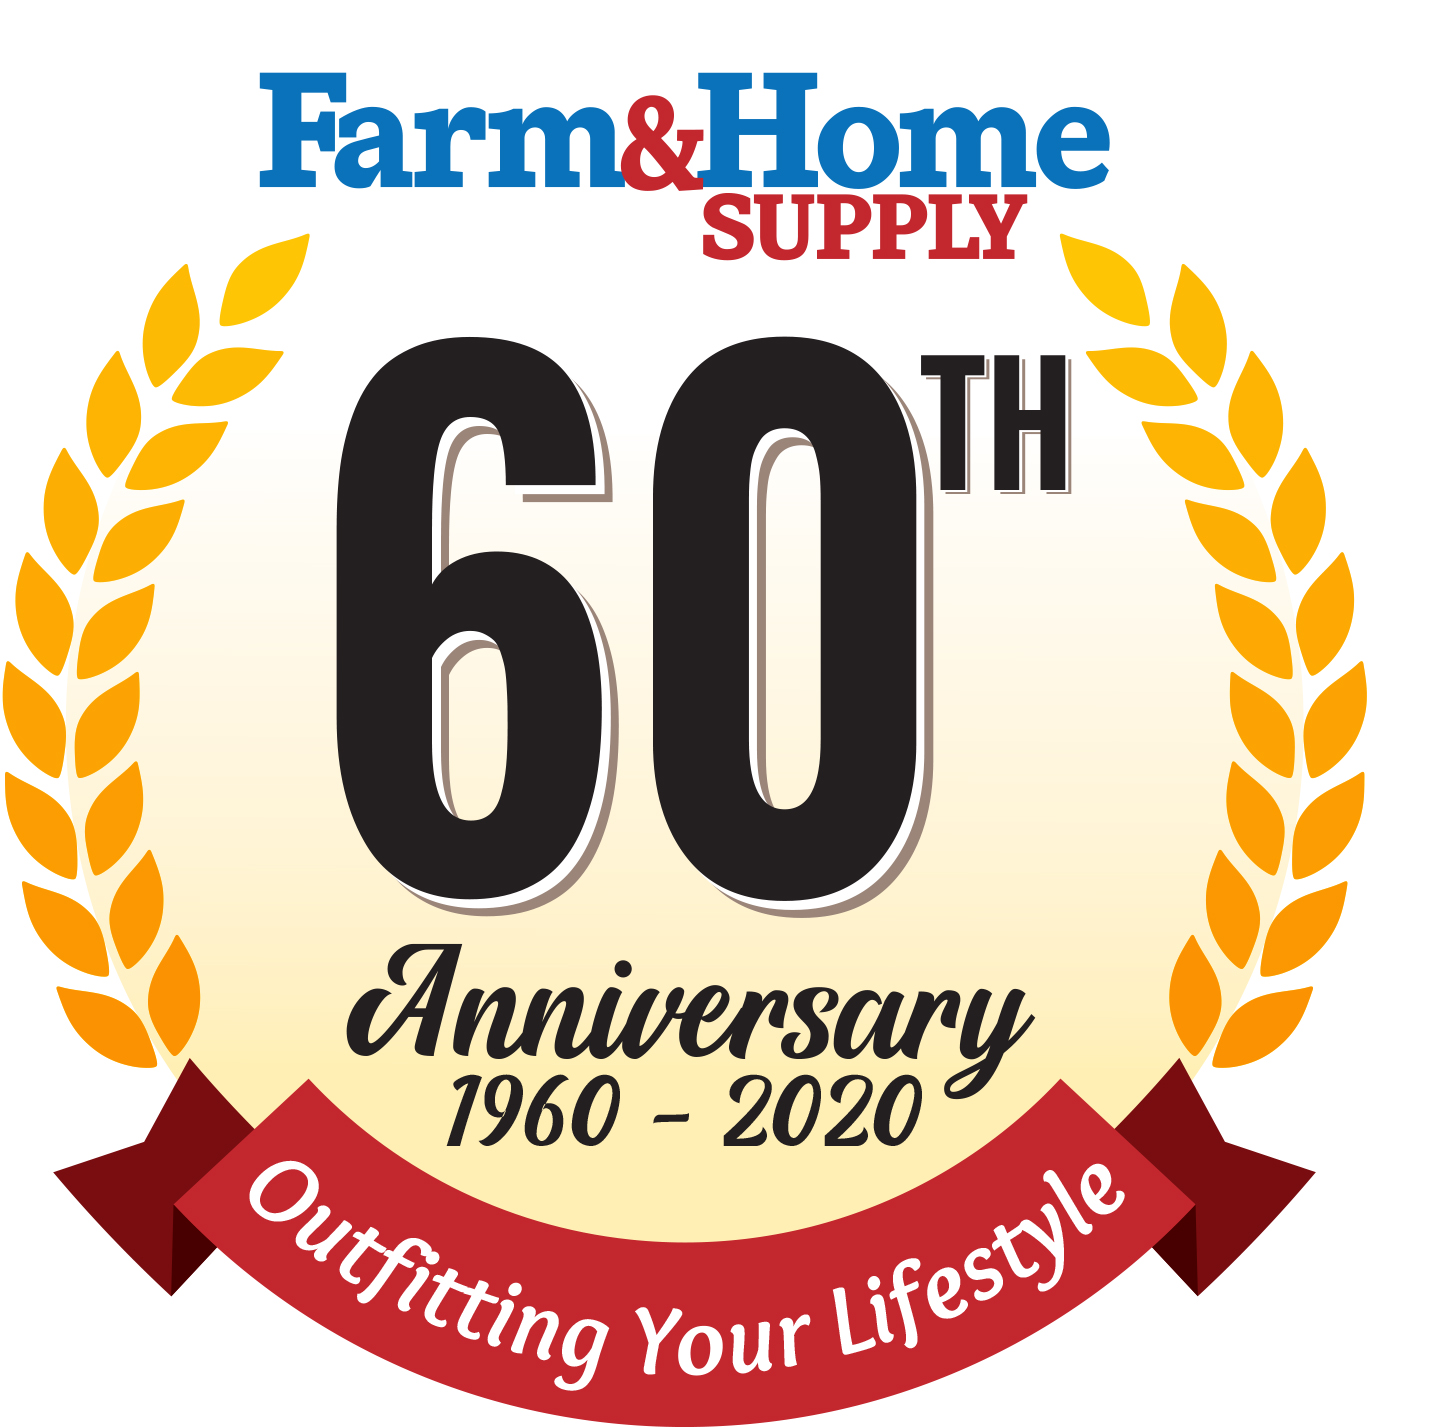 Farm and Home Supply Celebrates 60 Years in Business